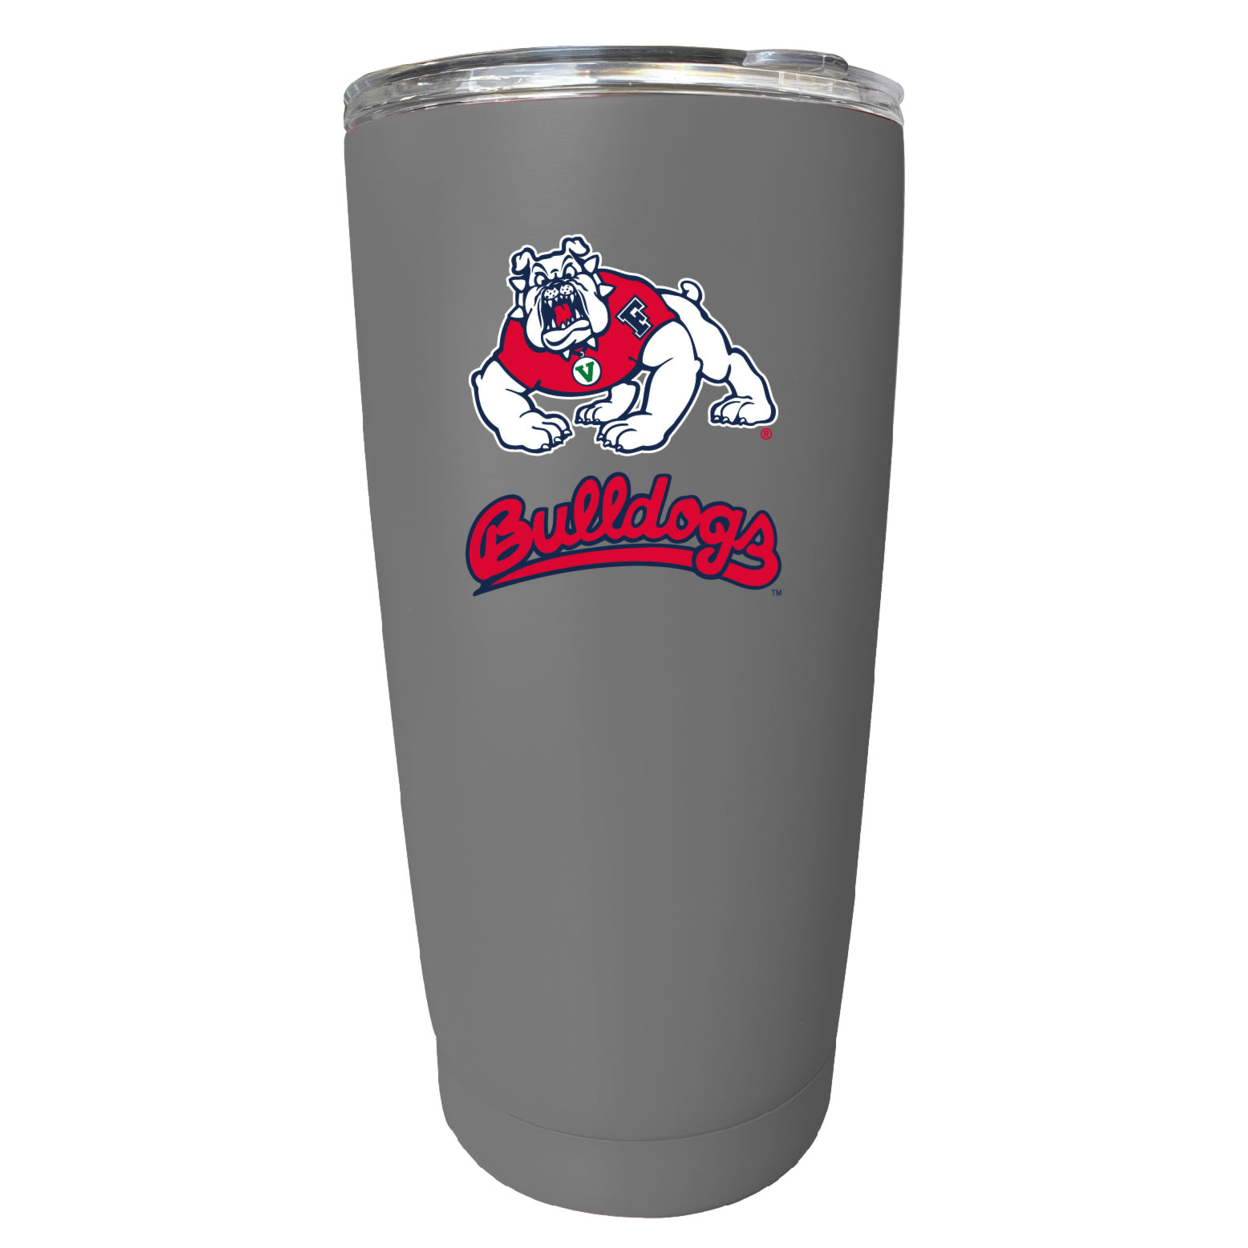 Fresno State Bulldogs 16 Oz Stainless Steel Insulated Tumbler - Gray